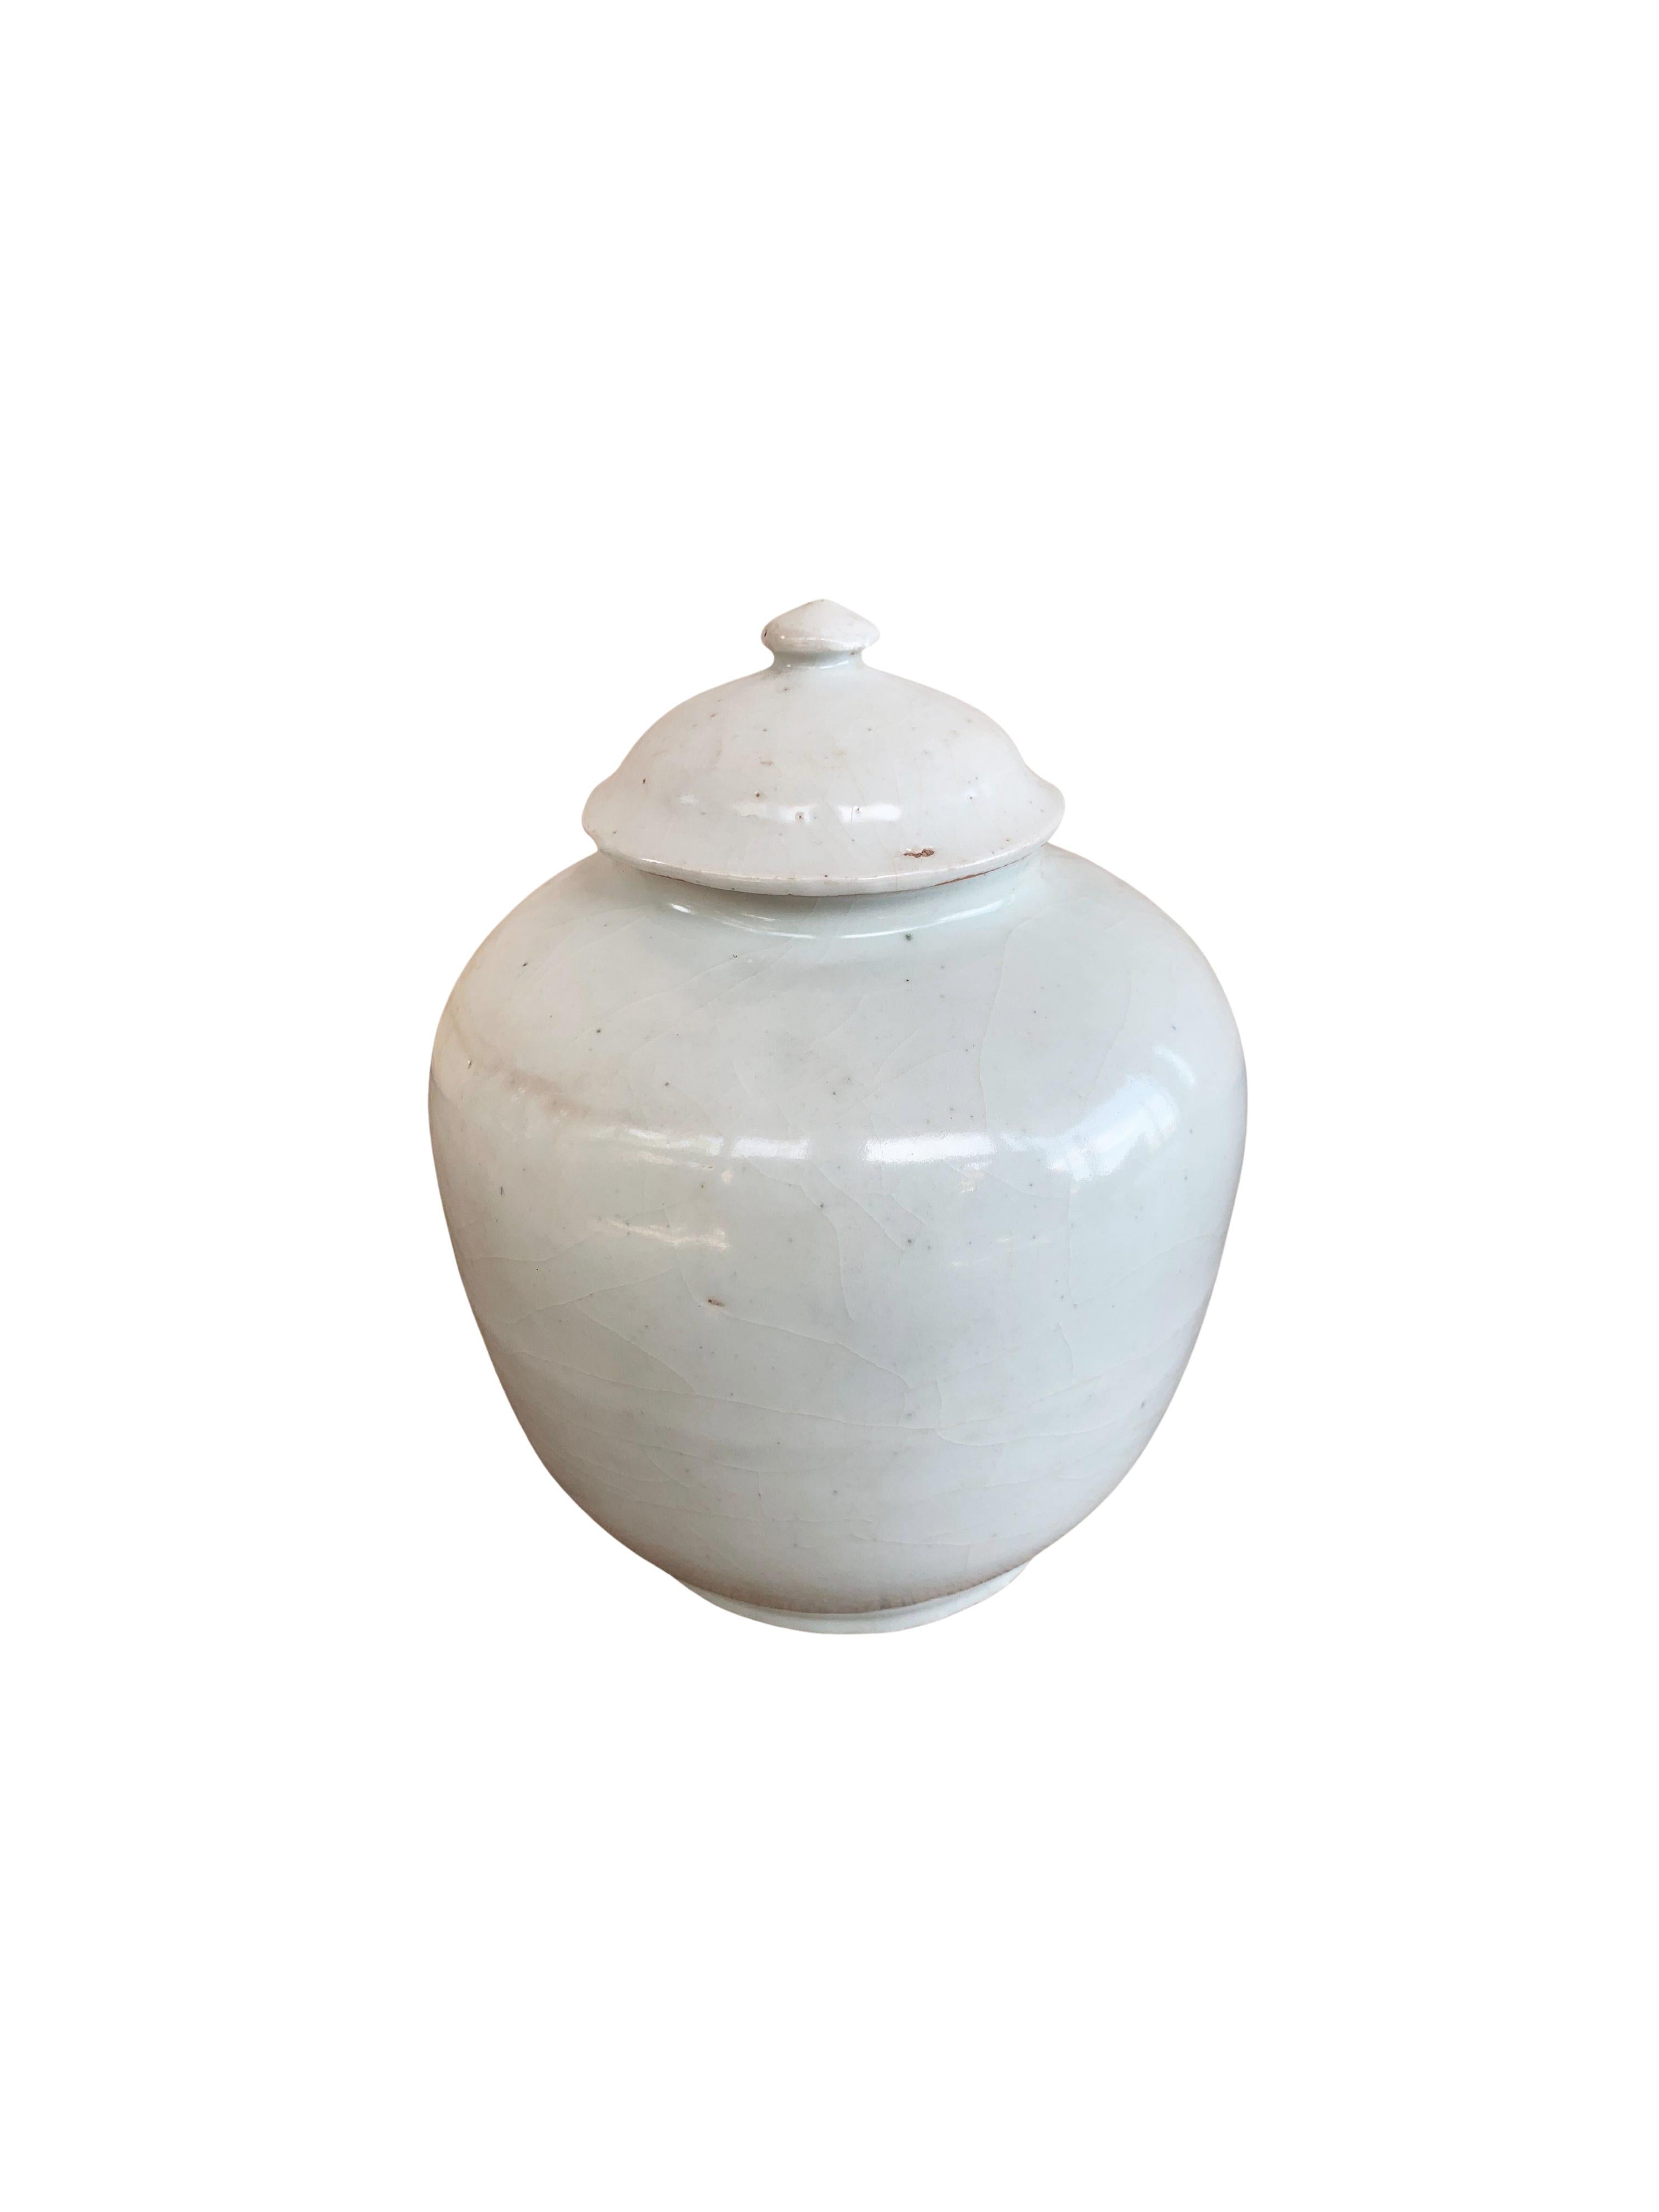 This ceramic ginger jar dates to the late 20th Century and orginates from China's Jiangxi province. It features an off-white and crackled glaze with a slight and very faint turquoise/blue tint. This Jar features a streamlined form with high